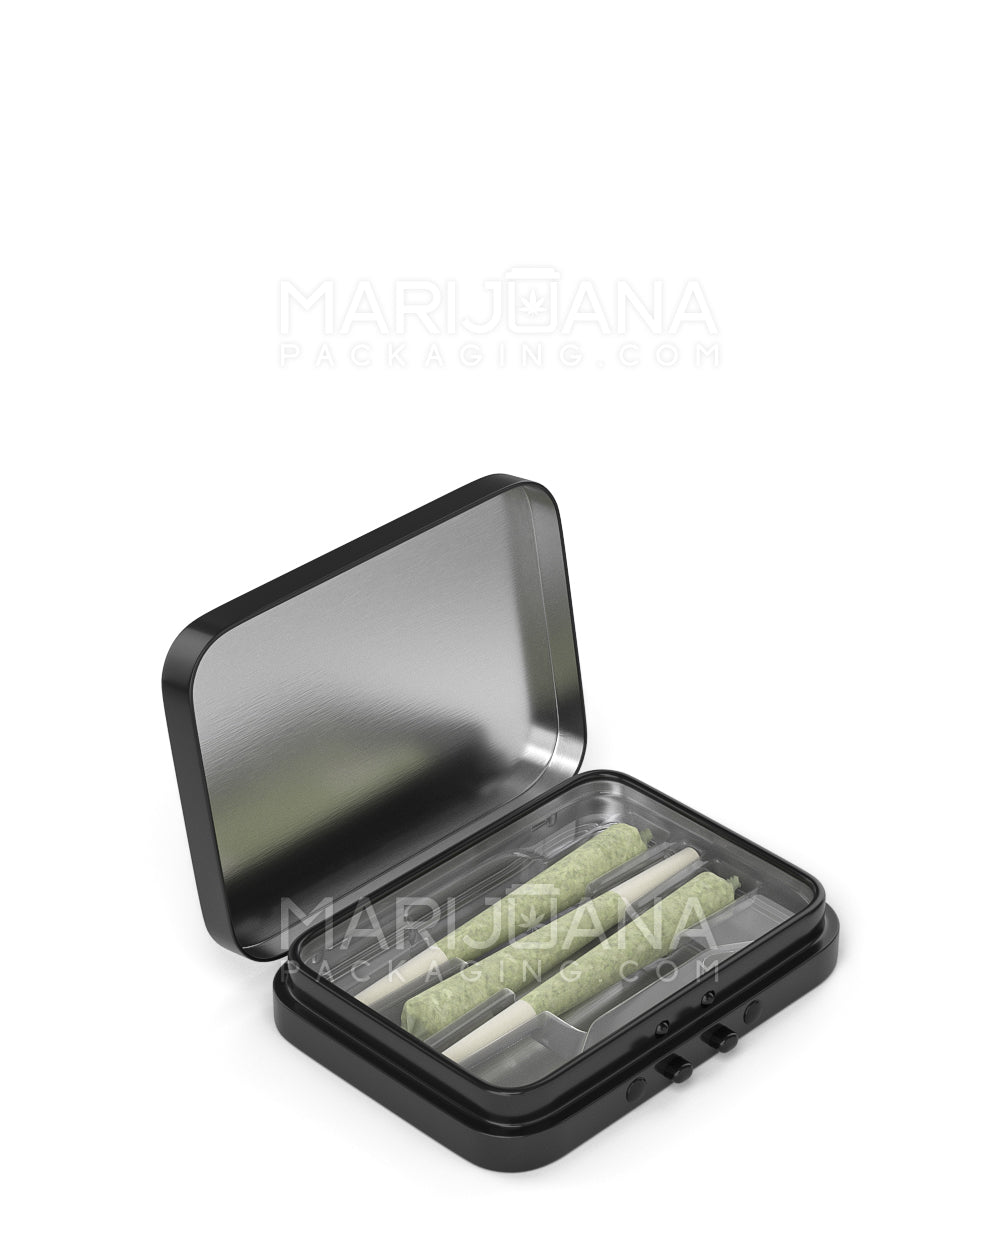 Edible & Joint Box Insert Tray for 3 Mini Pre Rolled Cones | 70mm - Clear Plastic - 100 Count - 8